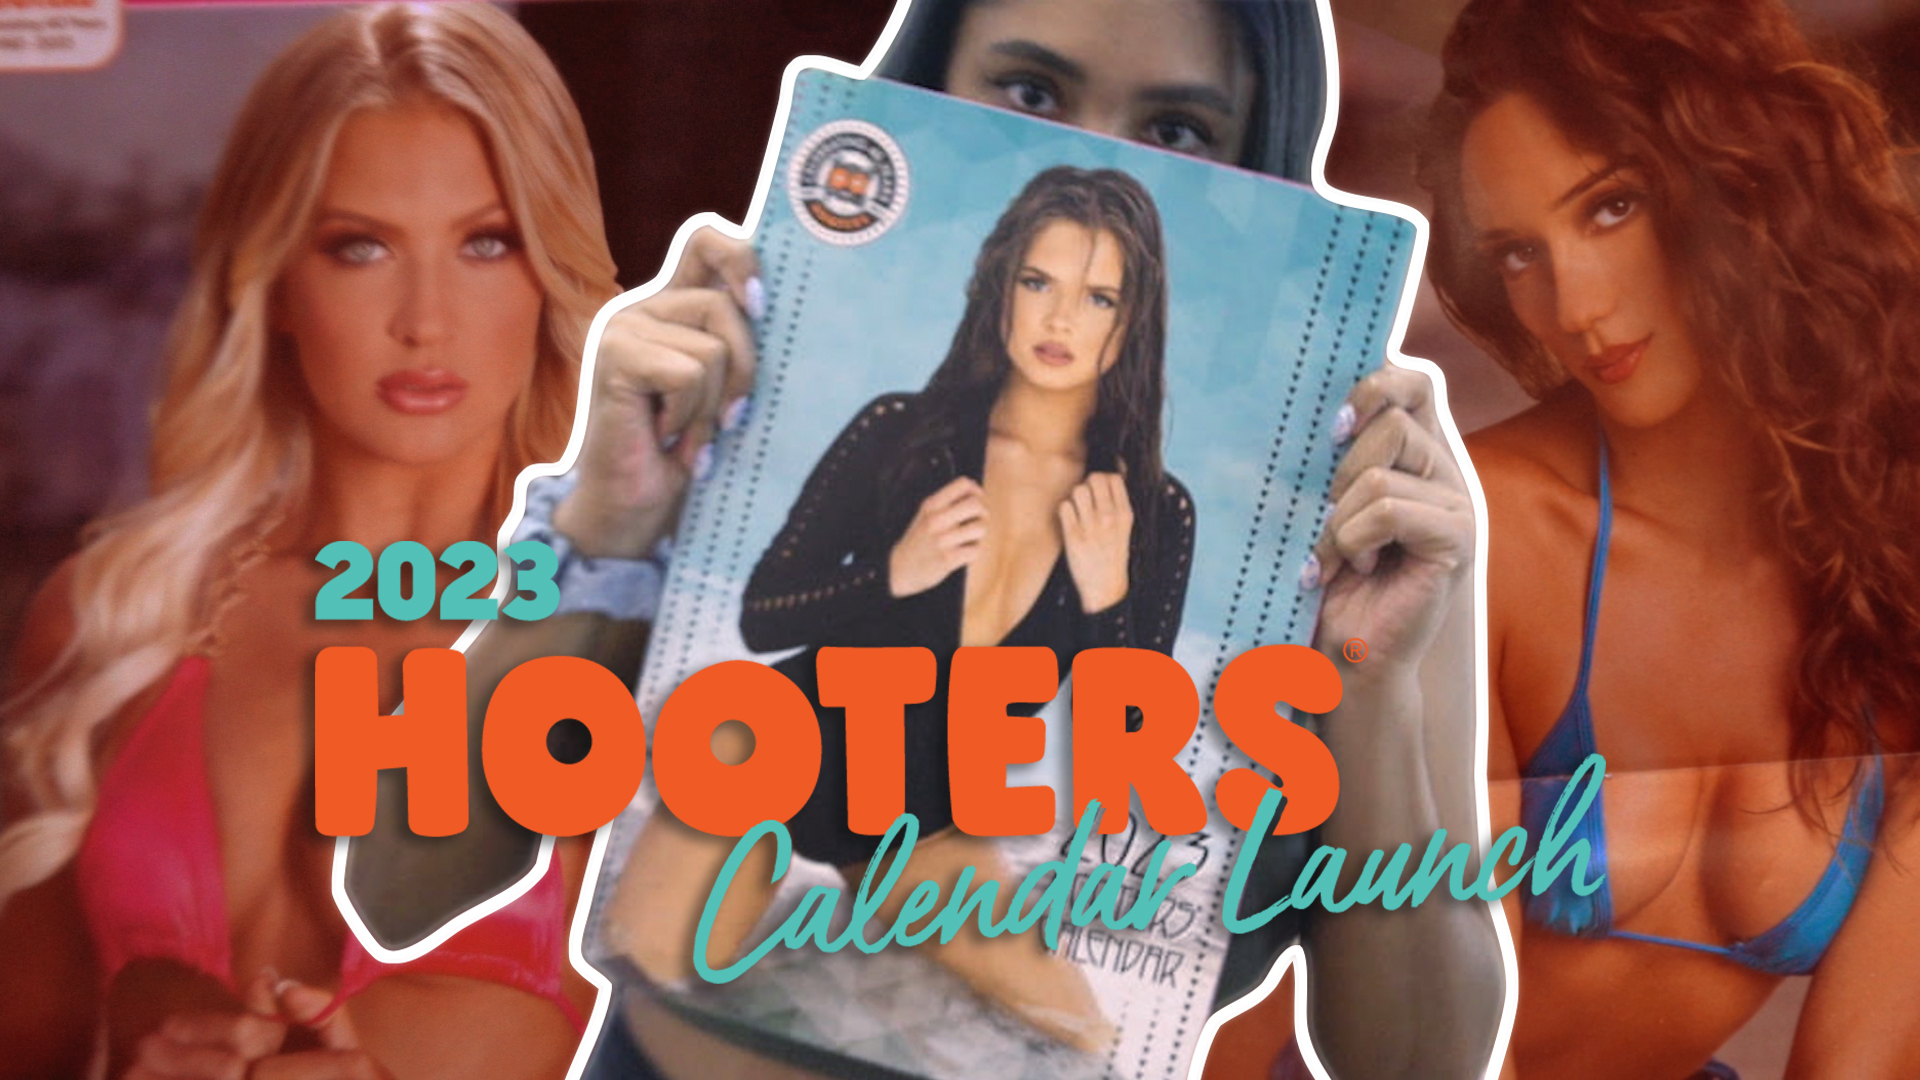 theCHIVE meets the 2023 Hooters Calendar Models